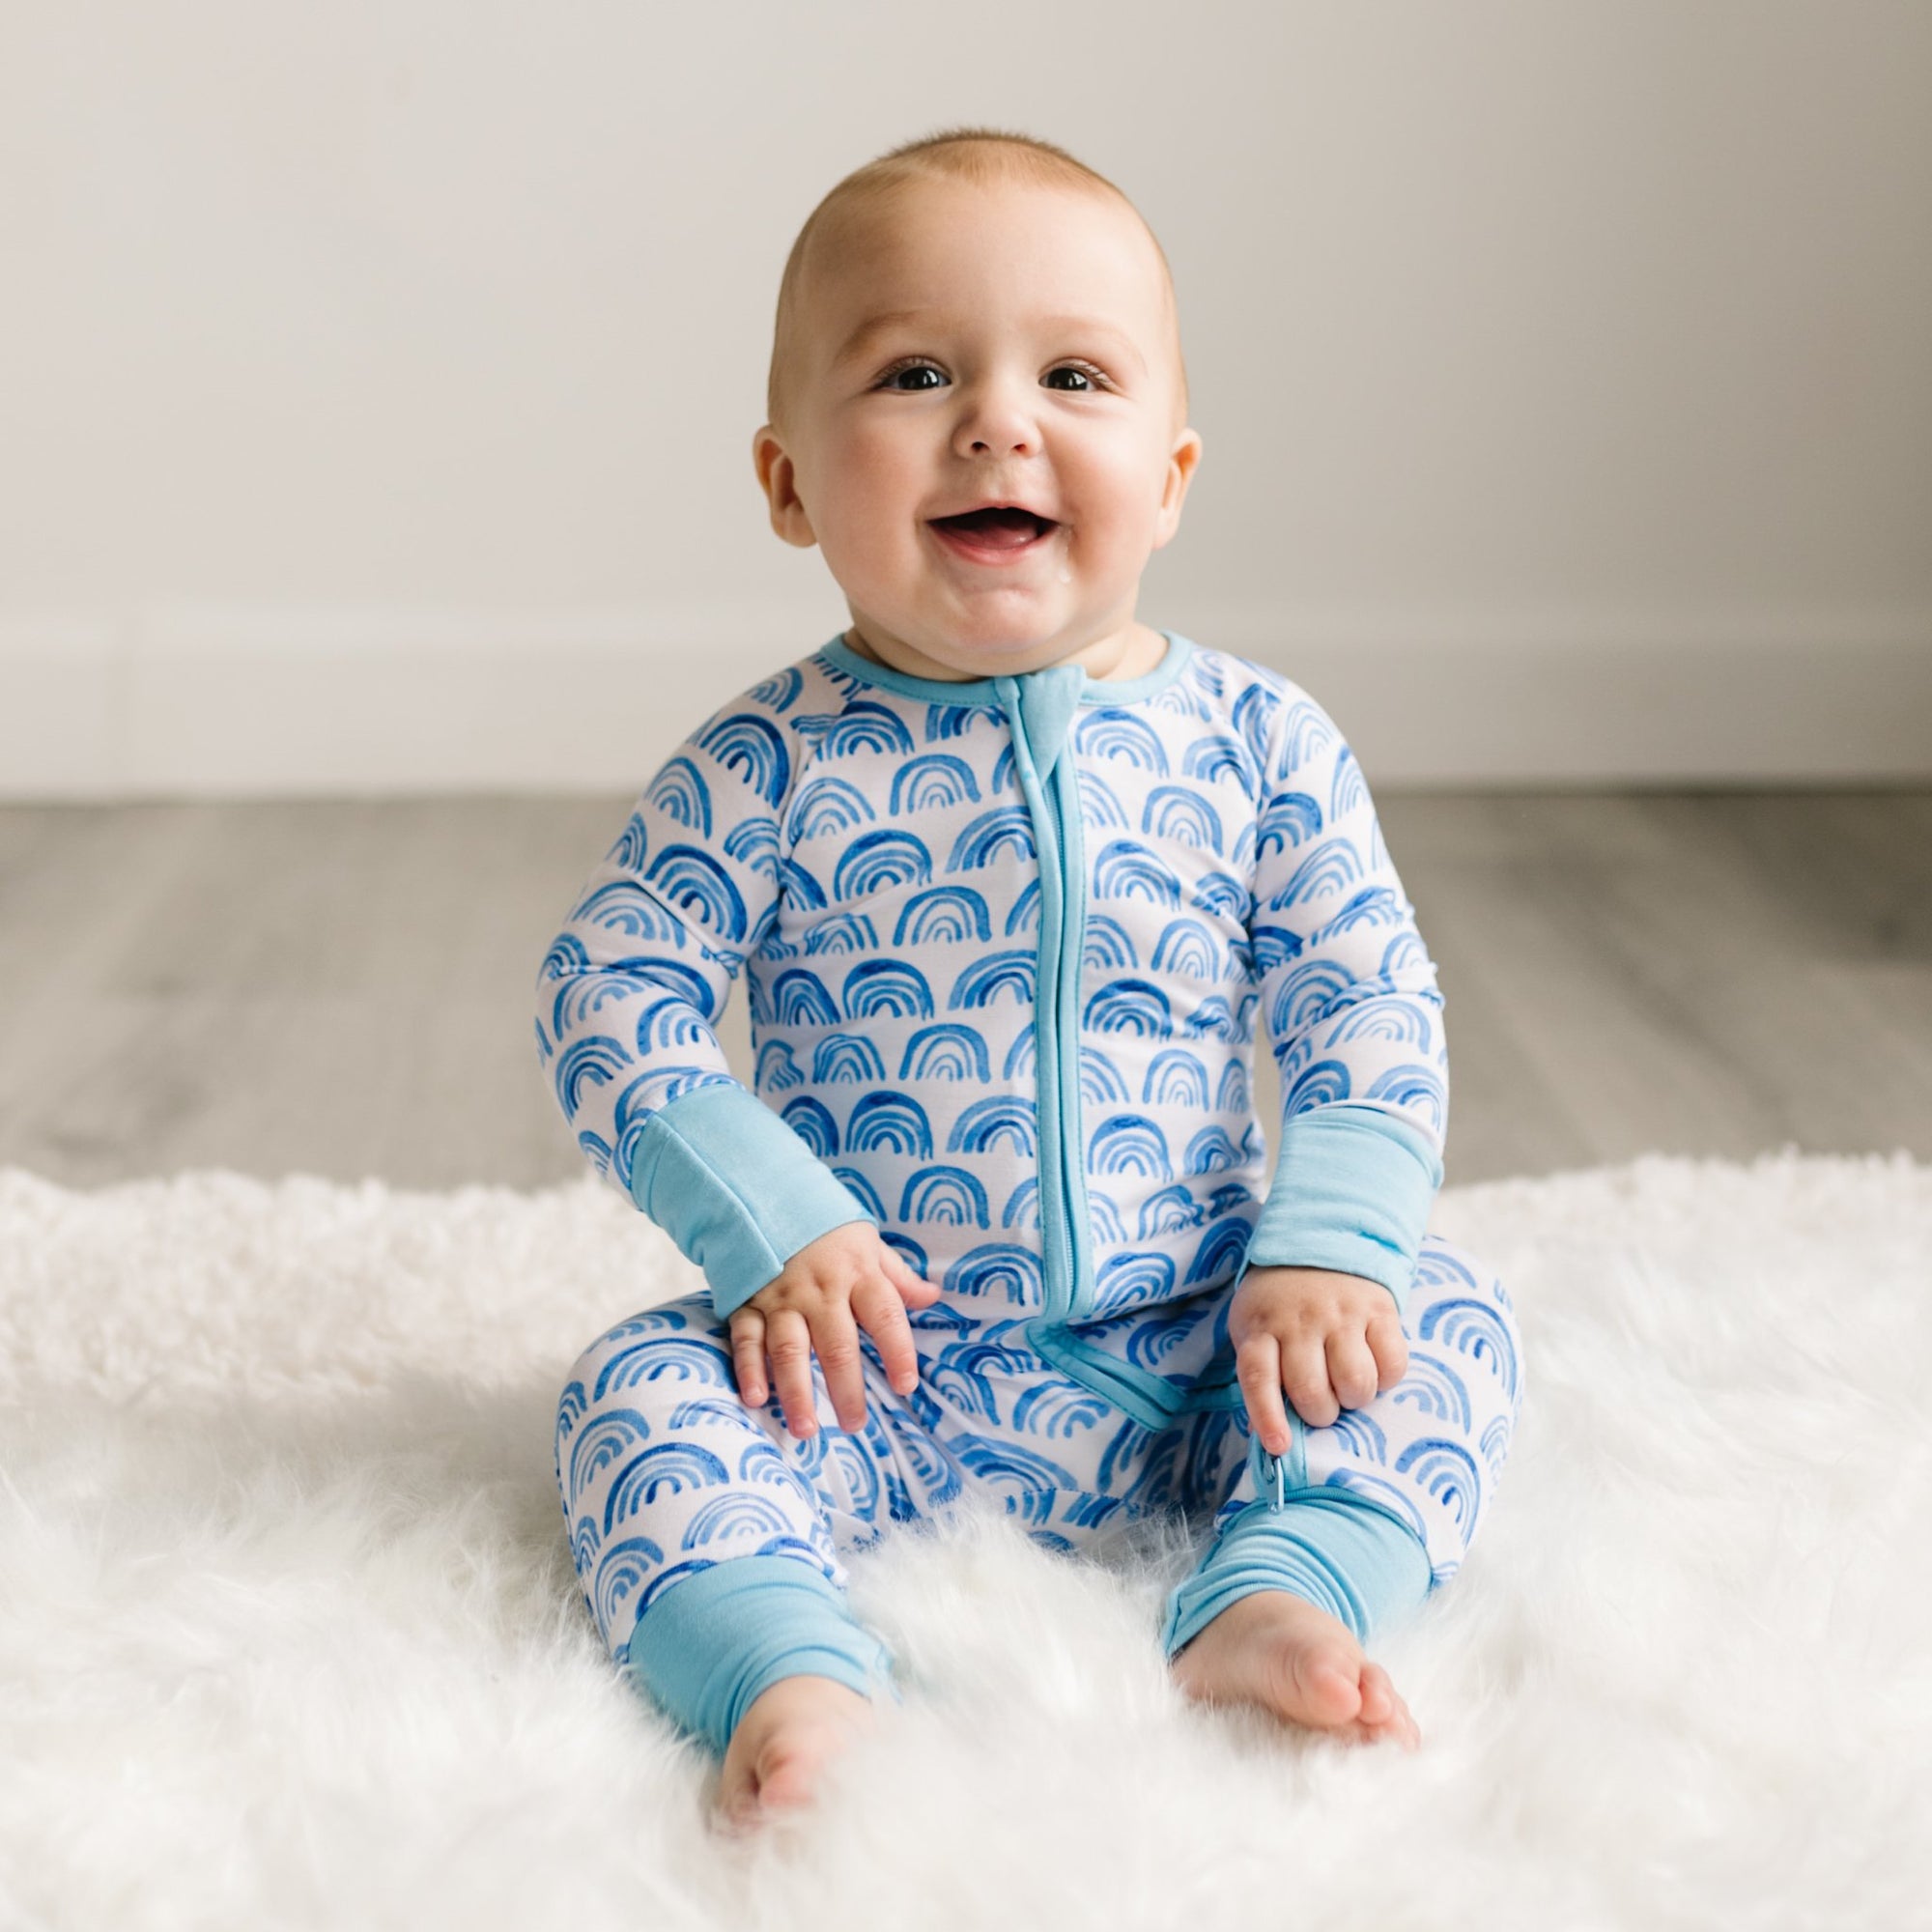 Image of baby boy wearing blue rainbow printed zip up romper. This print sits on a white background with shades of blue rainbows and sky blue trim details.